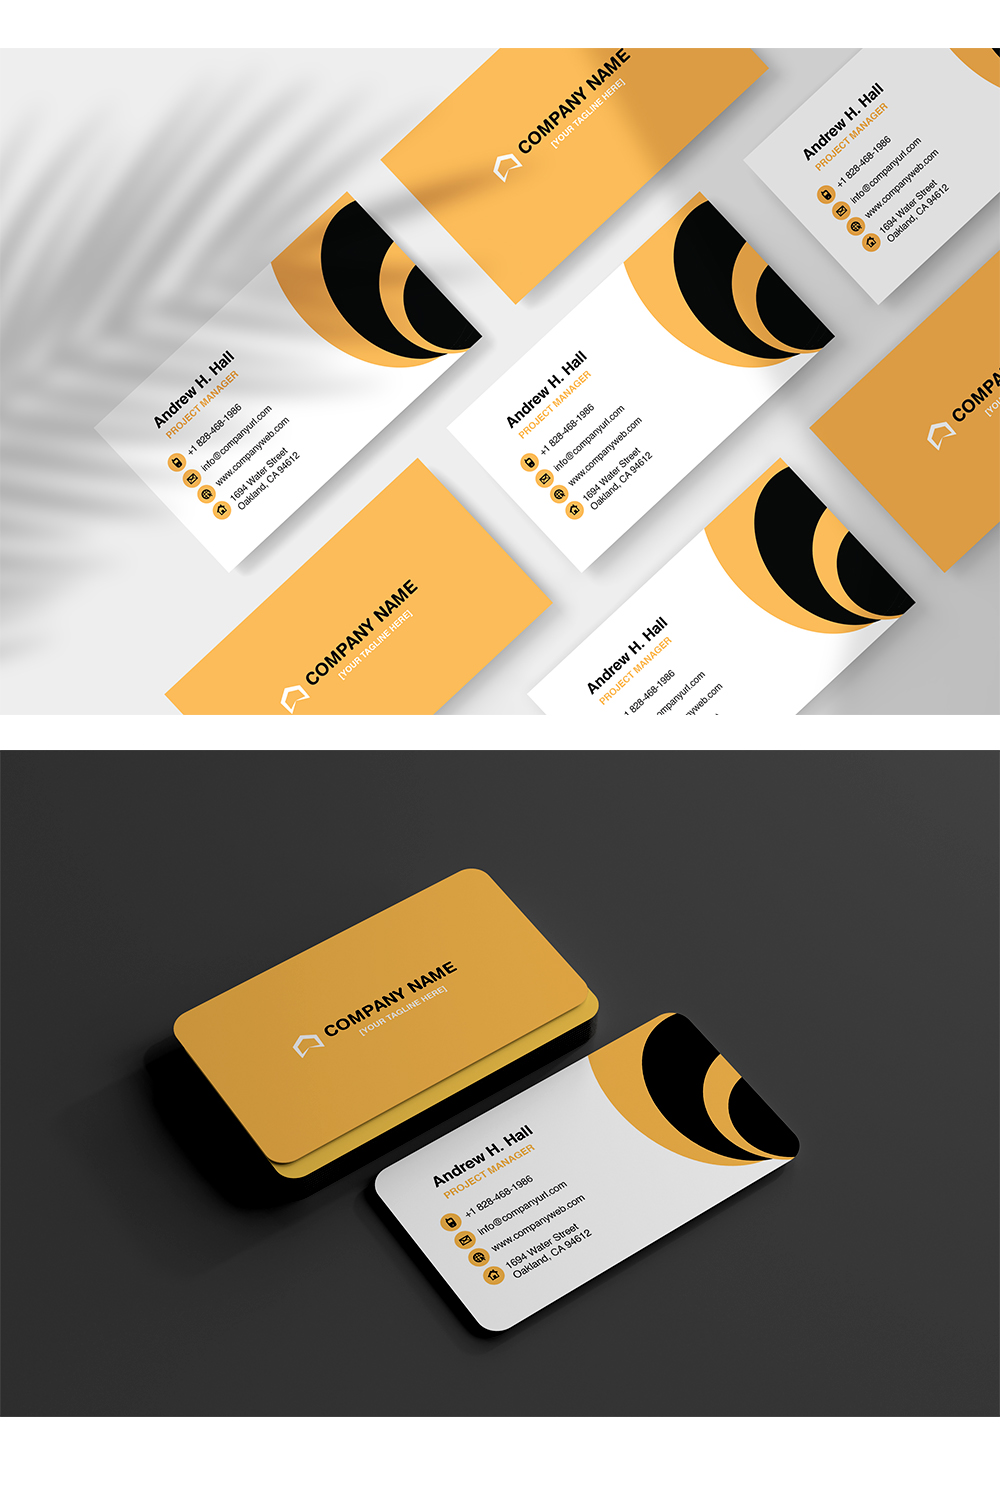 Colorful Minimal and Modern Business Card Visiting Card Template pinterest.